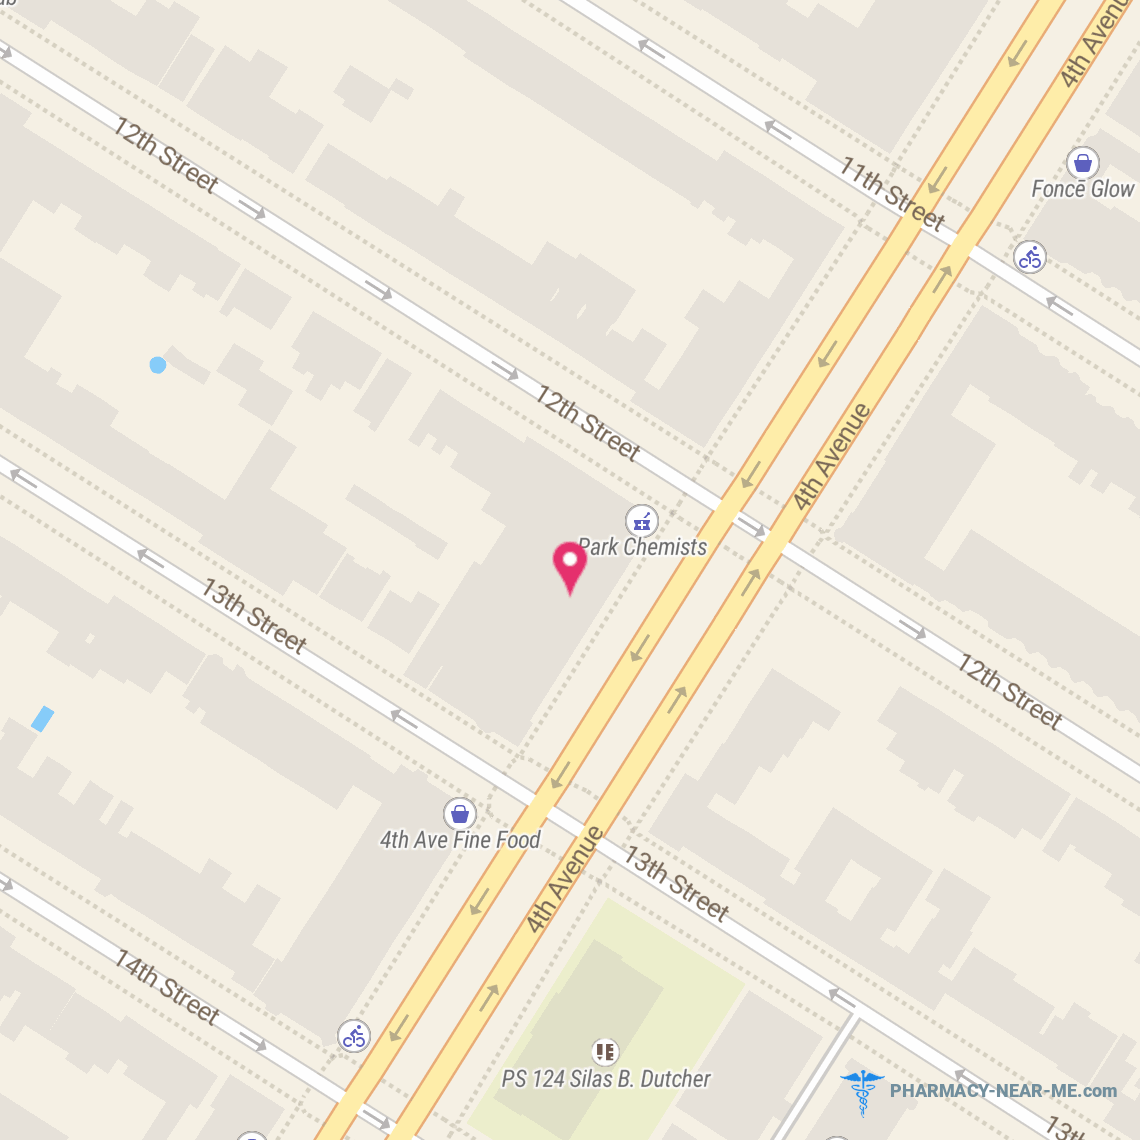 PARK CHEMISTS - Pharmacy Hours, Phone, Reviews & Information: 500 4th Avenue, Brooklyn, New York 11215, United States